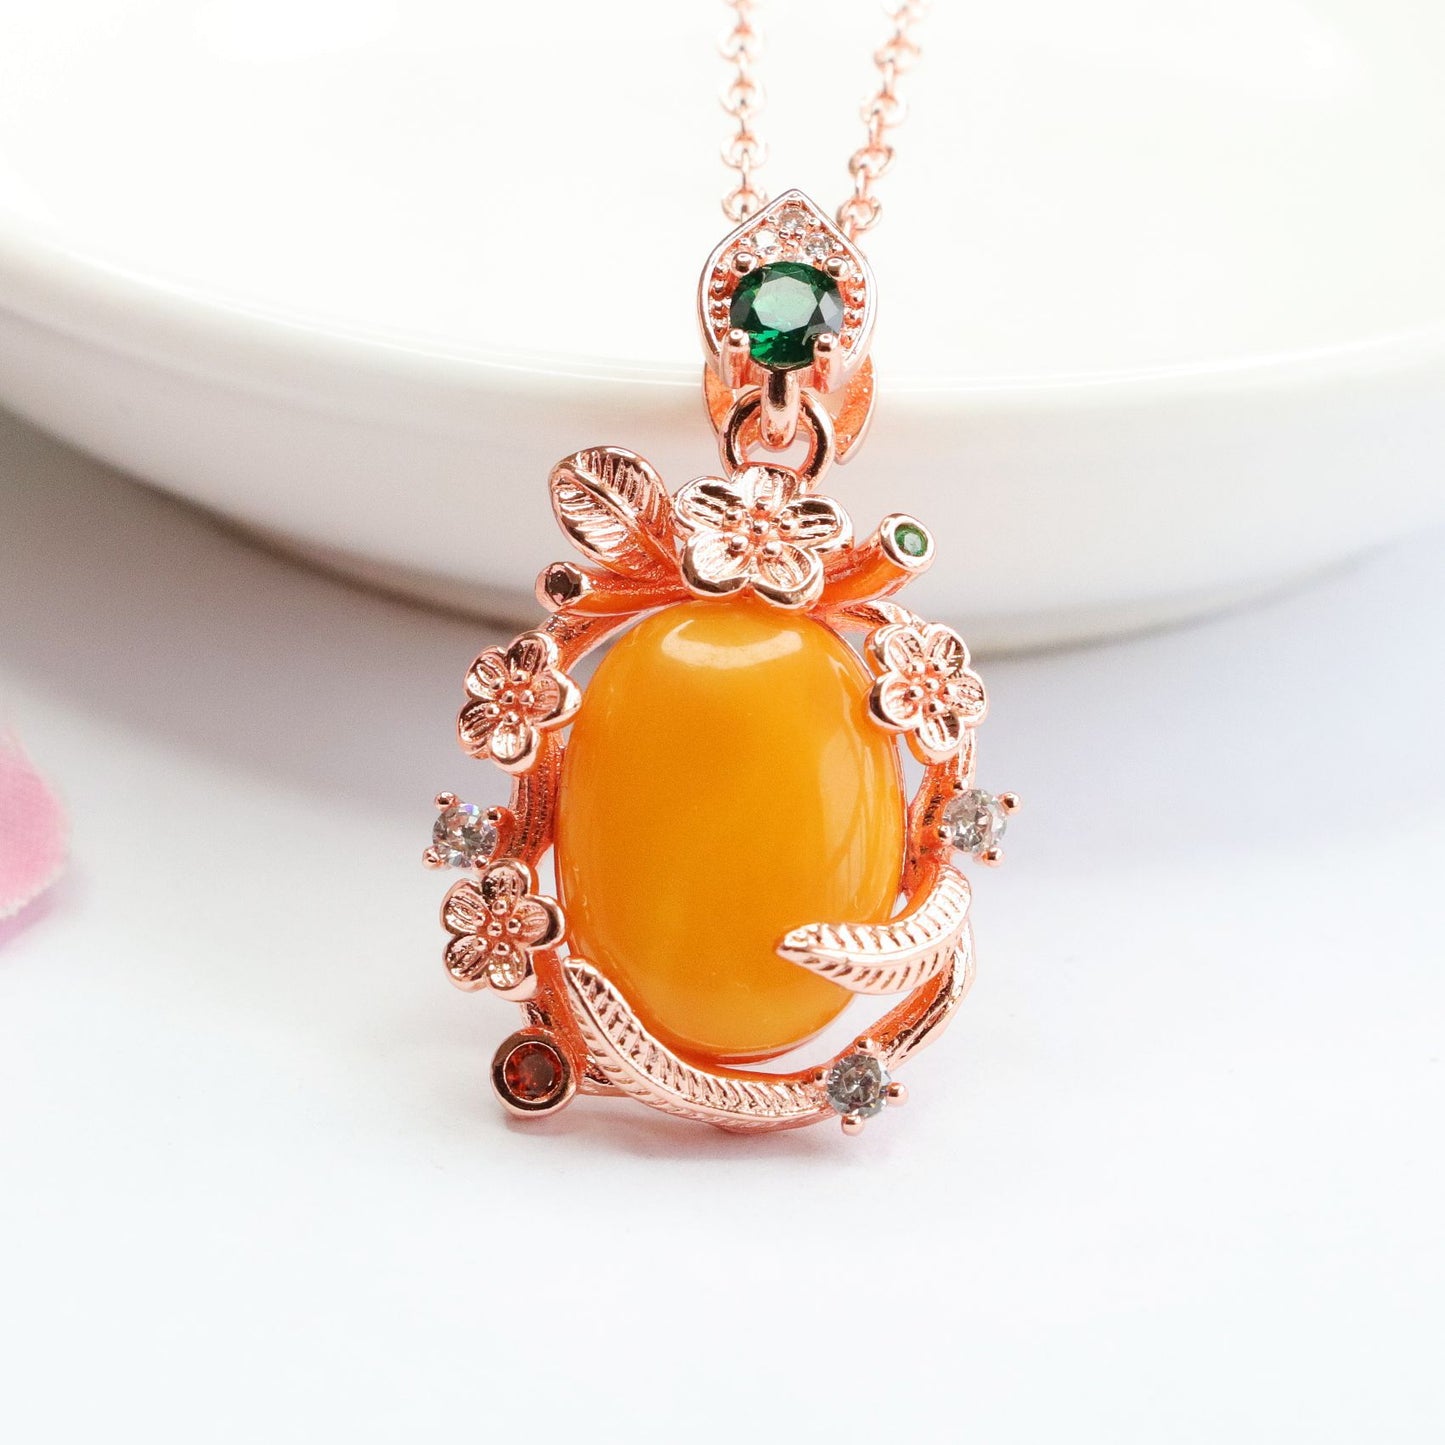 Amber Beeswax Pendant with Zircon Garland Necklace - Sterling Silver Necklace